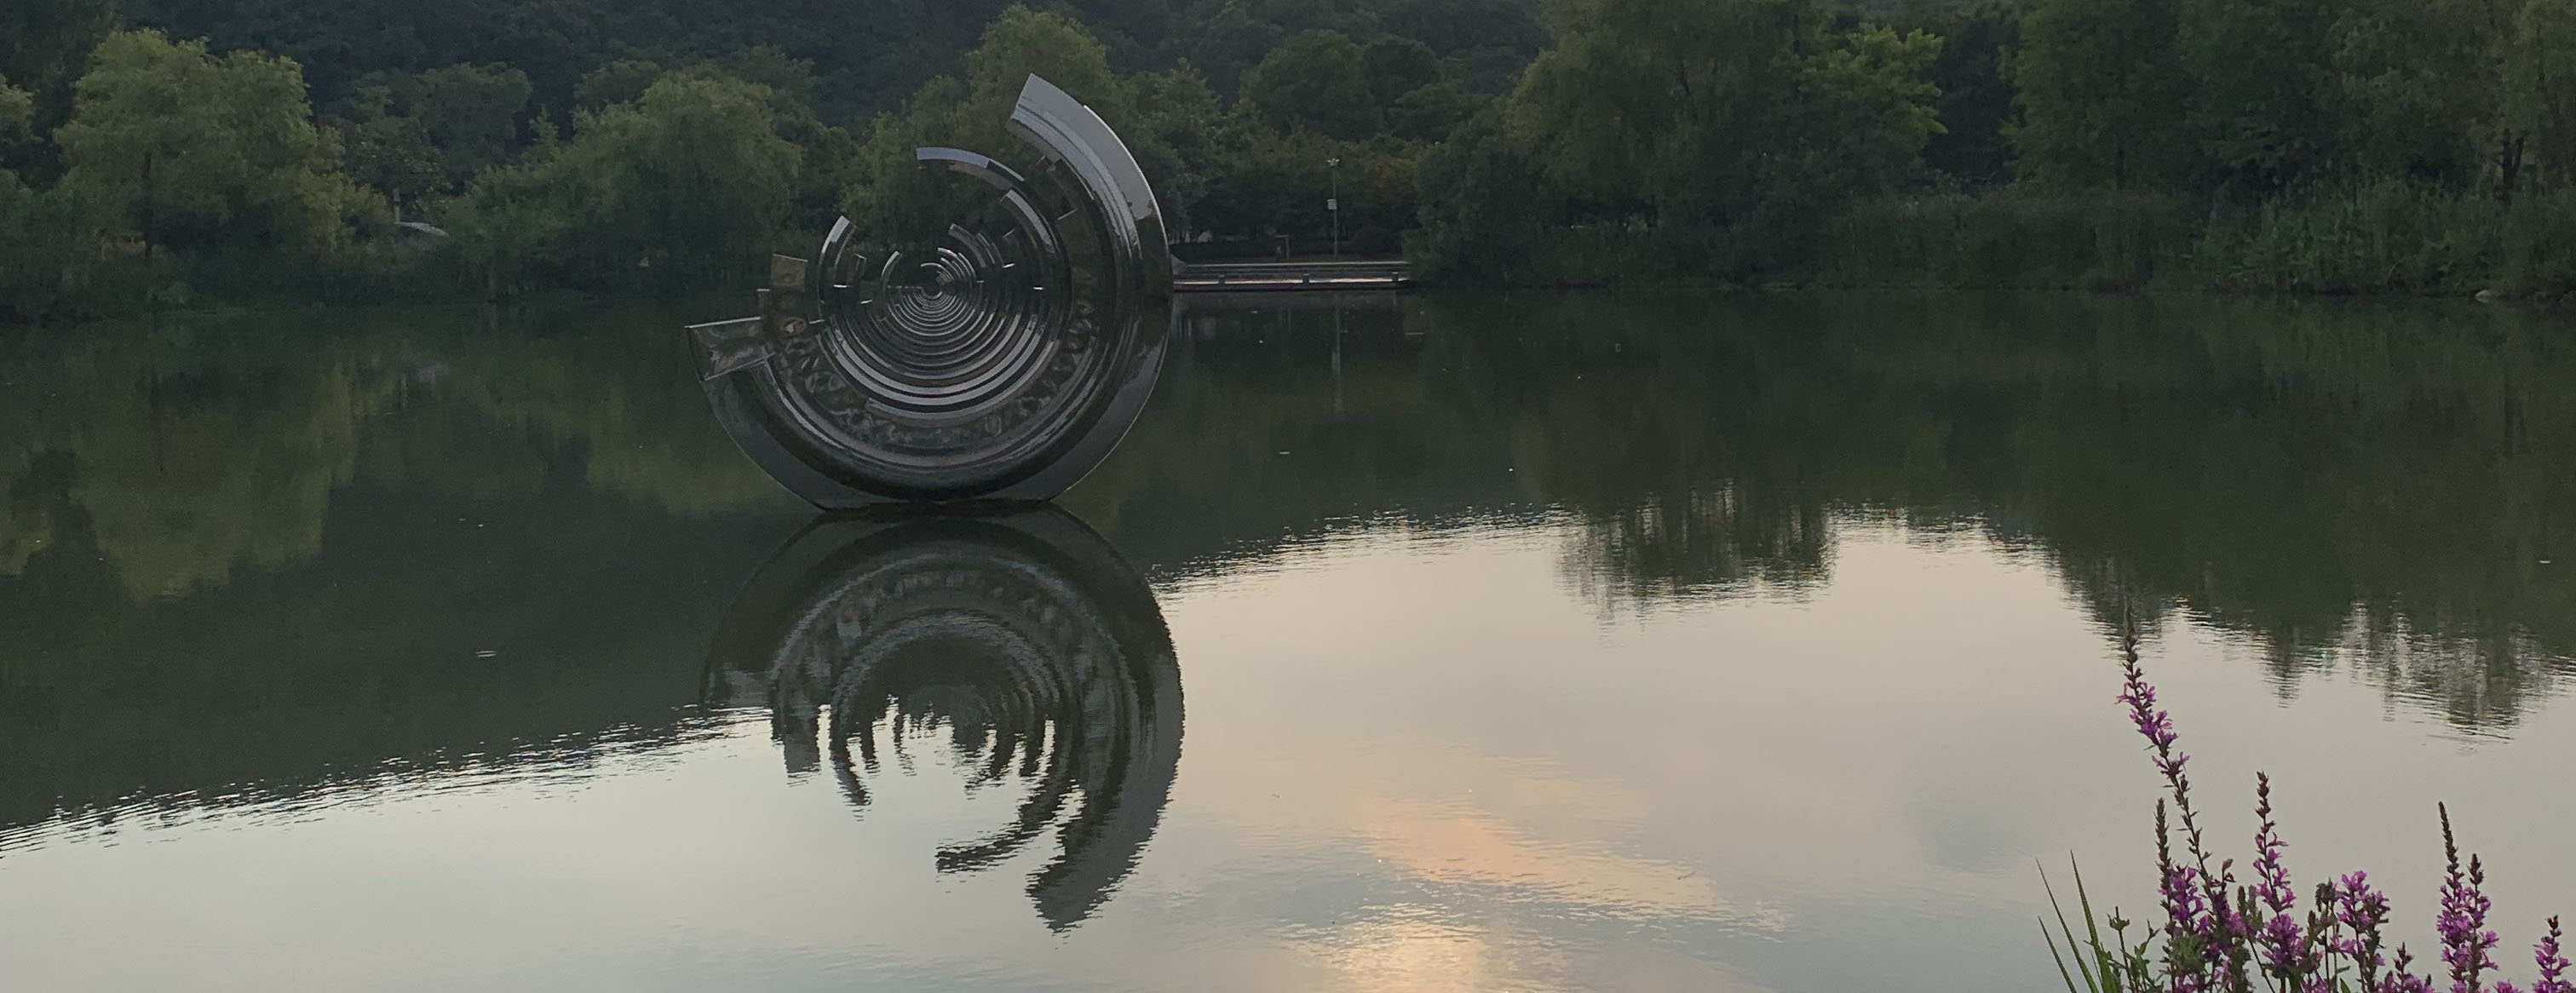 reflection of a round sculpture in water